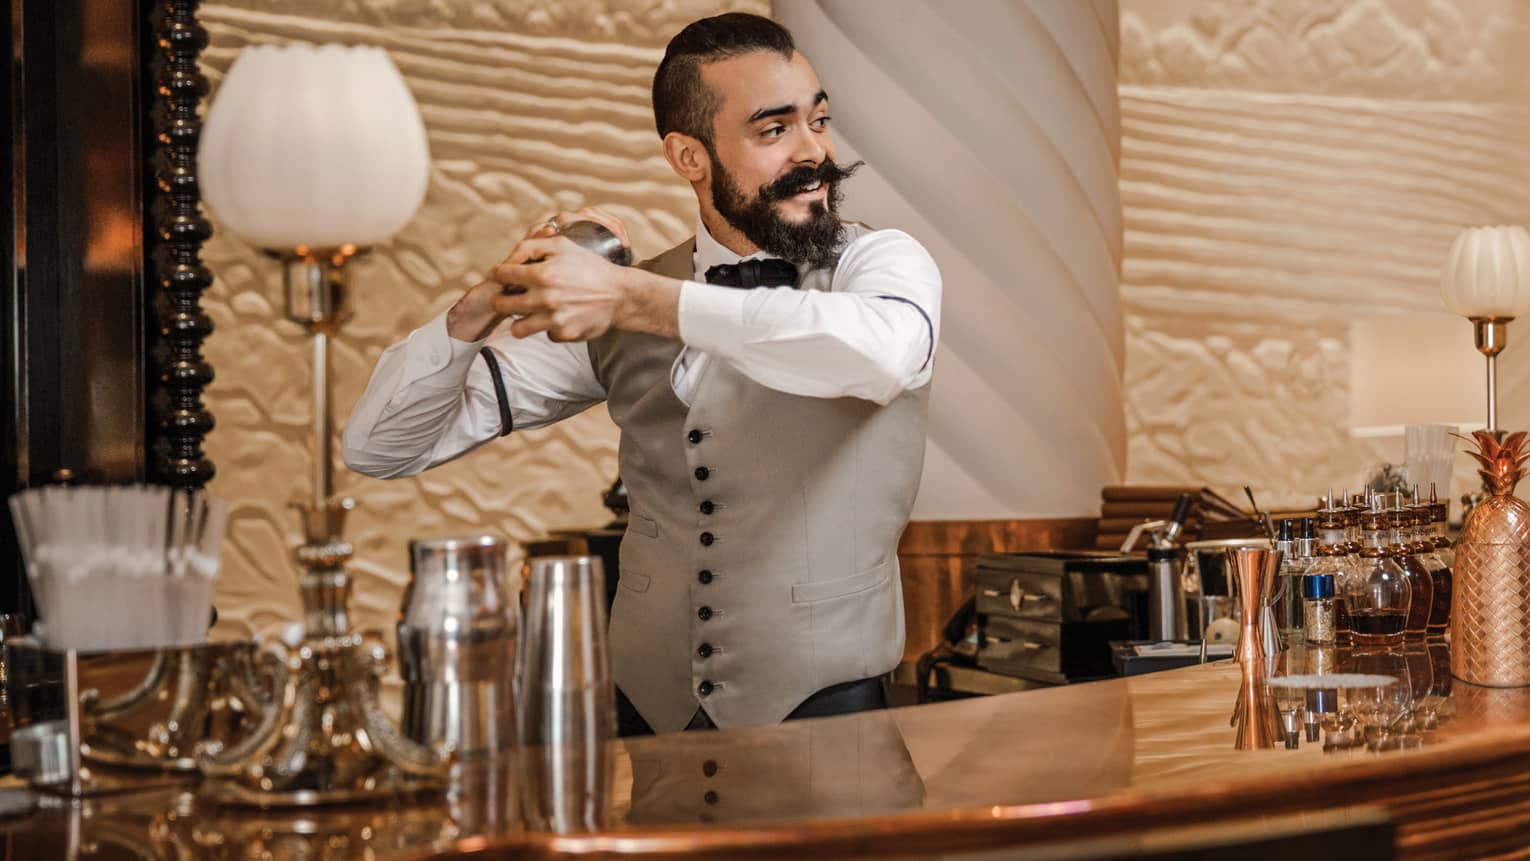 Mixologist with beard and waxed mustache, vest shakes cocktail behind bar